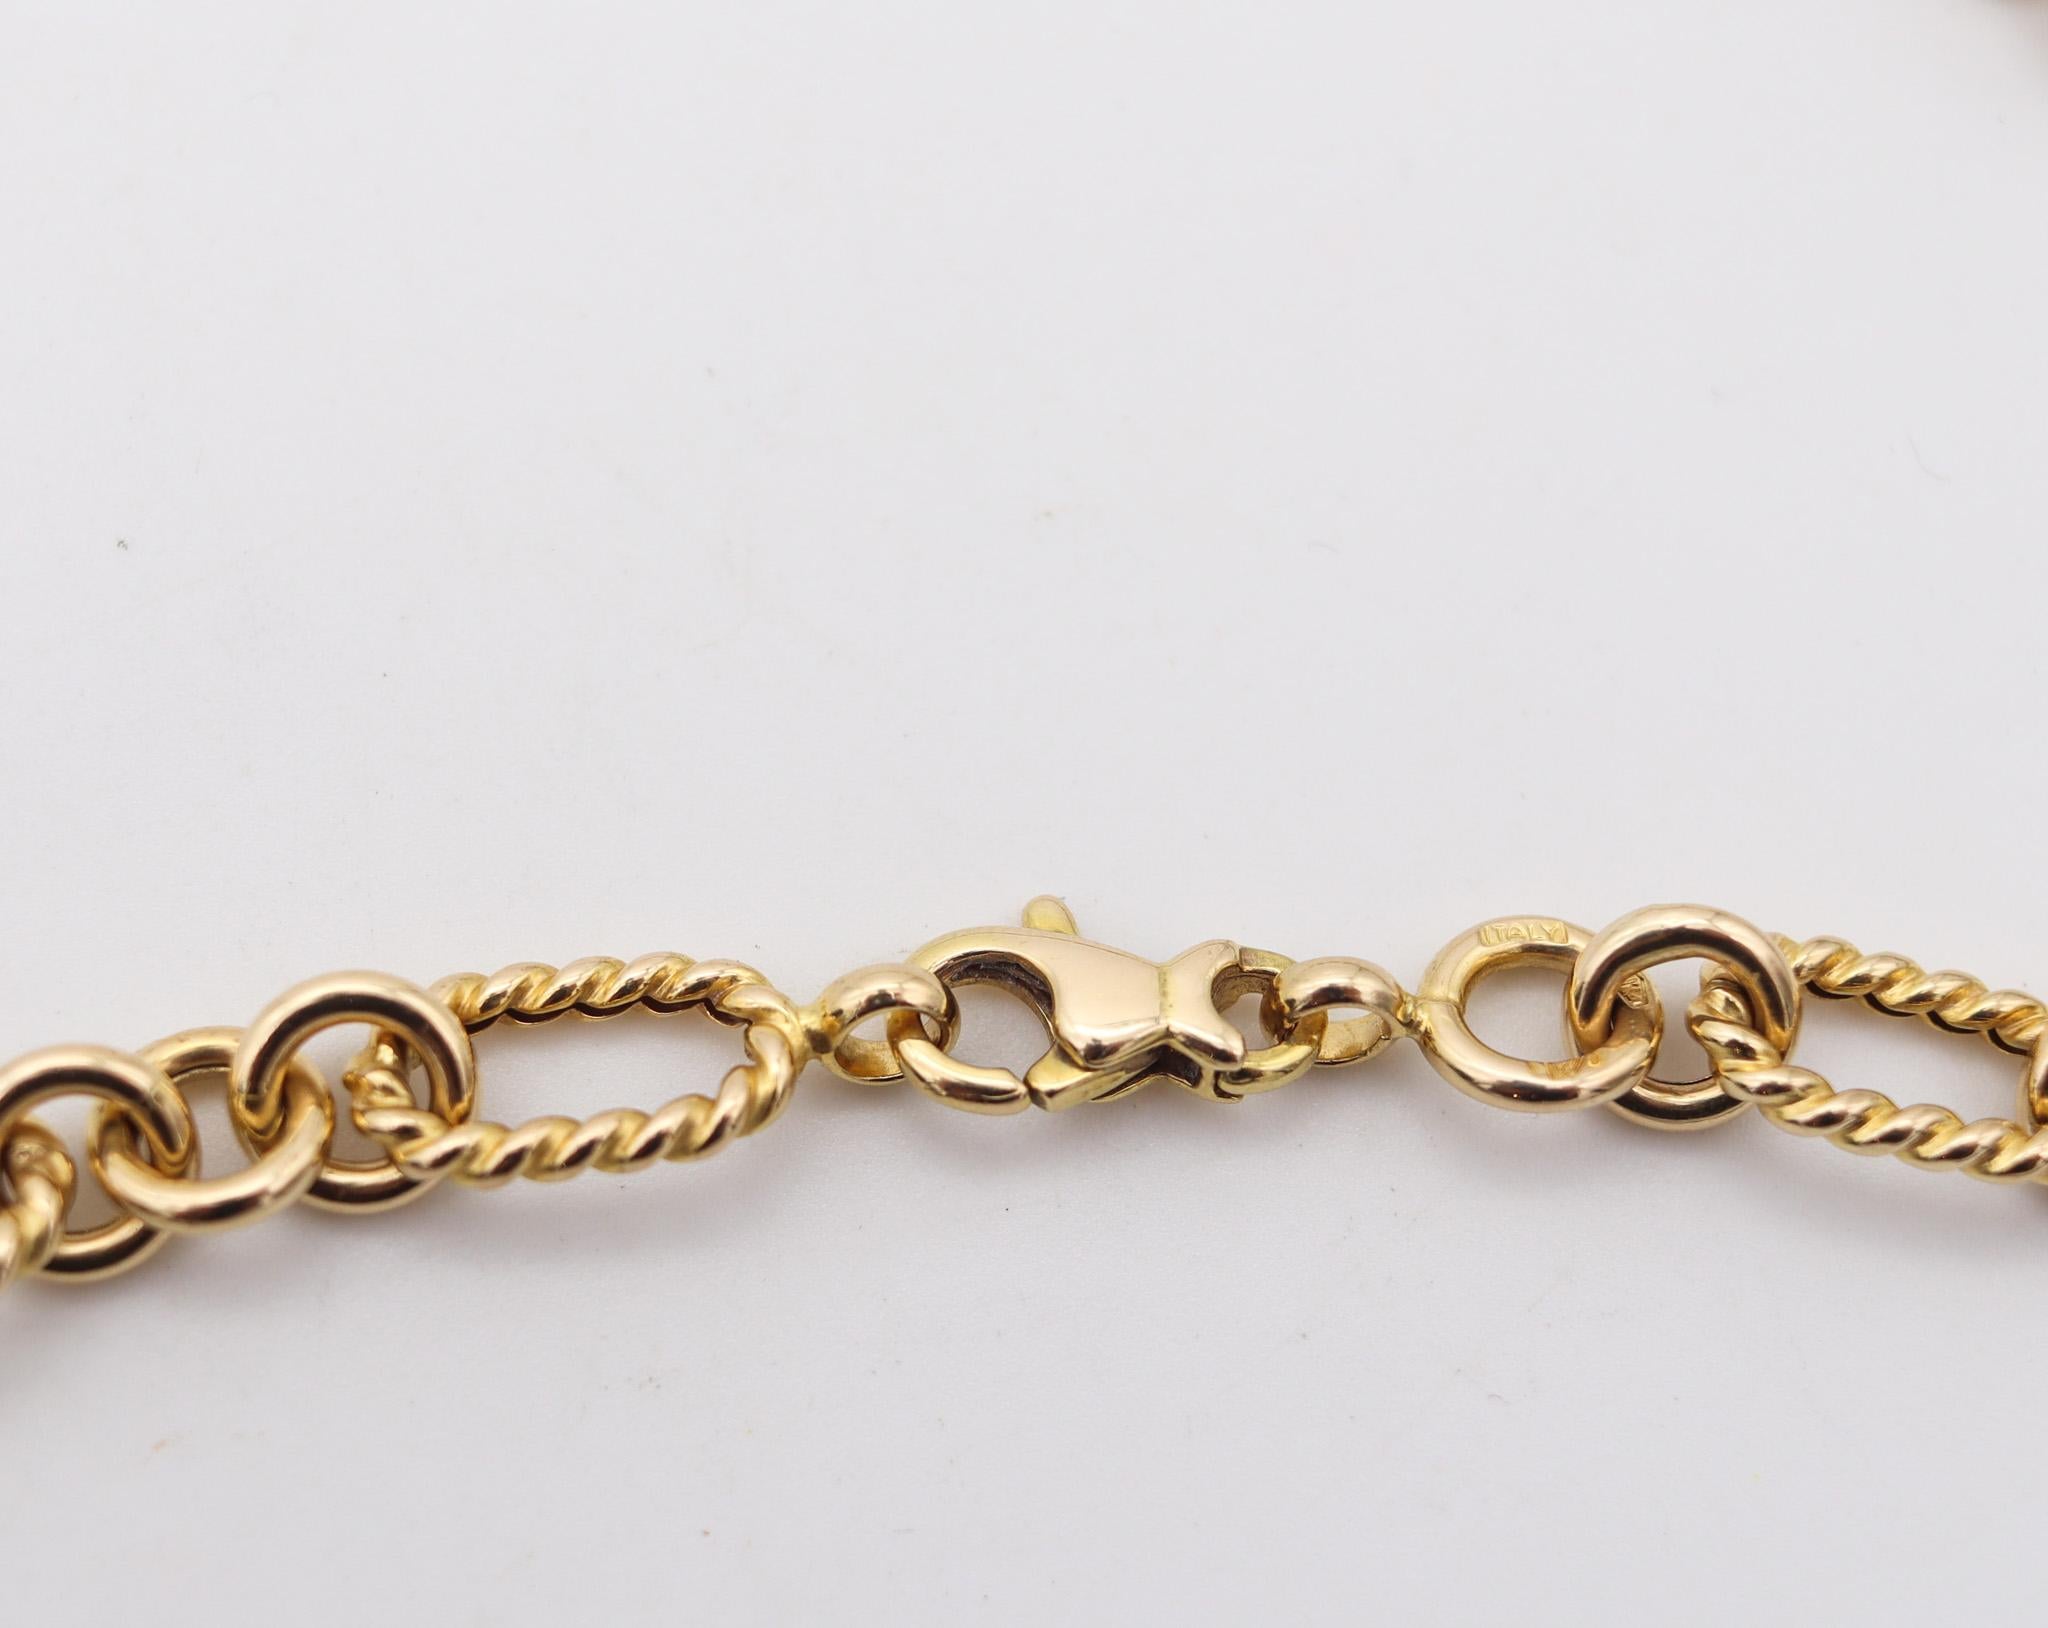 Italian Modern Fancy Twisted Links Long Chain In 14Kt Yellow Gold In Excellent Condition For Sale In Miami, FL